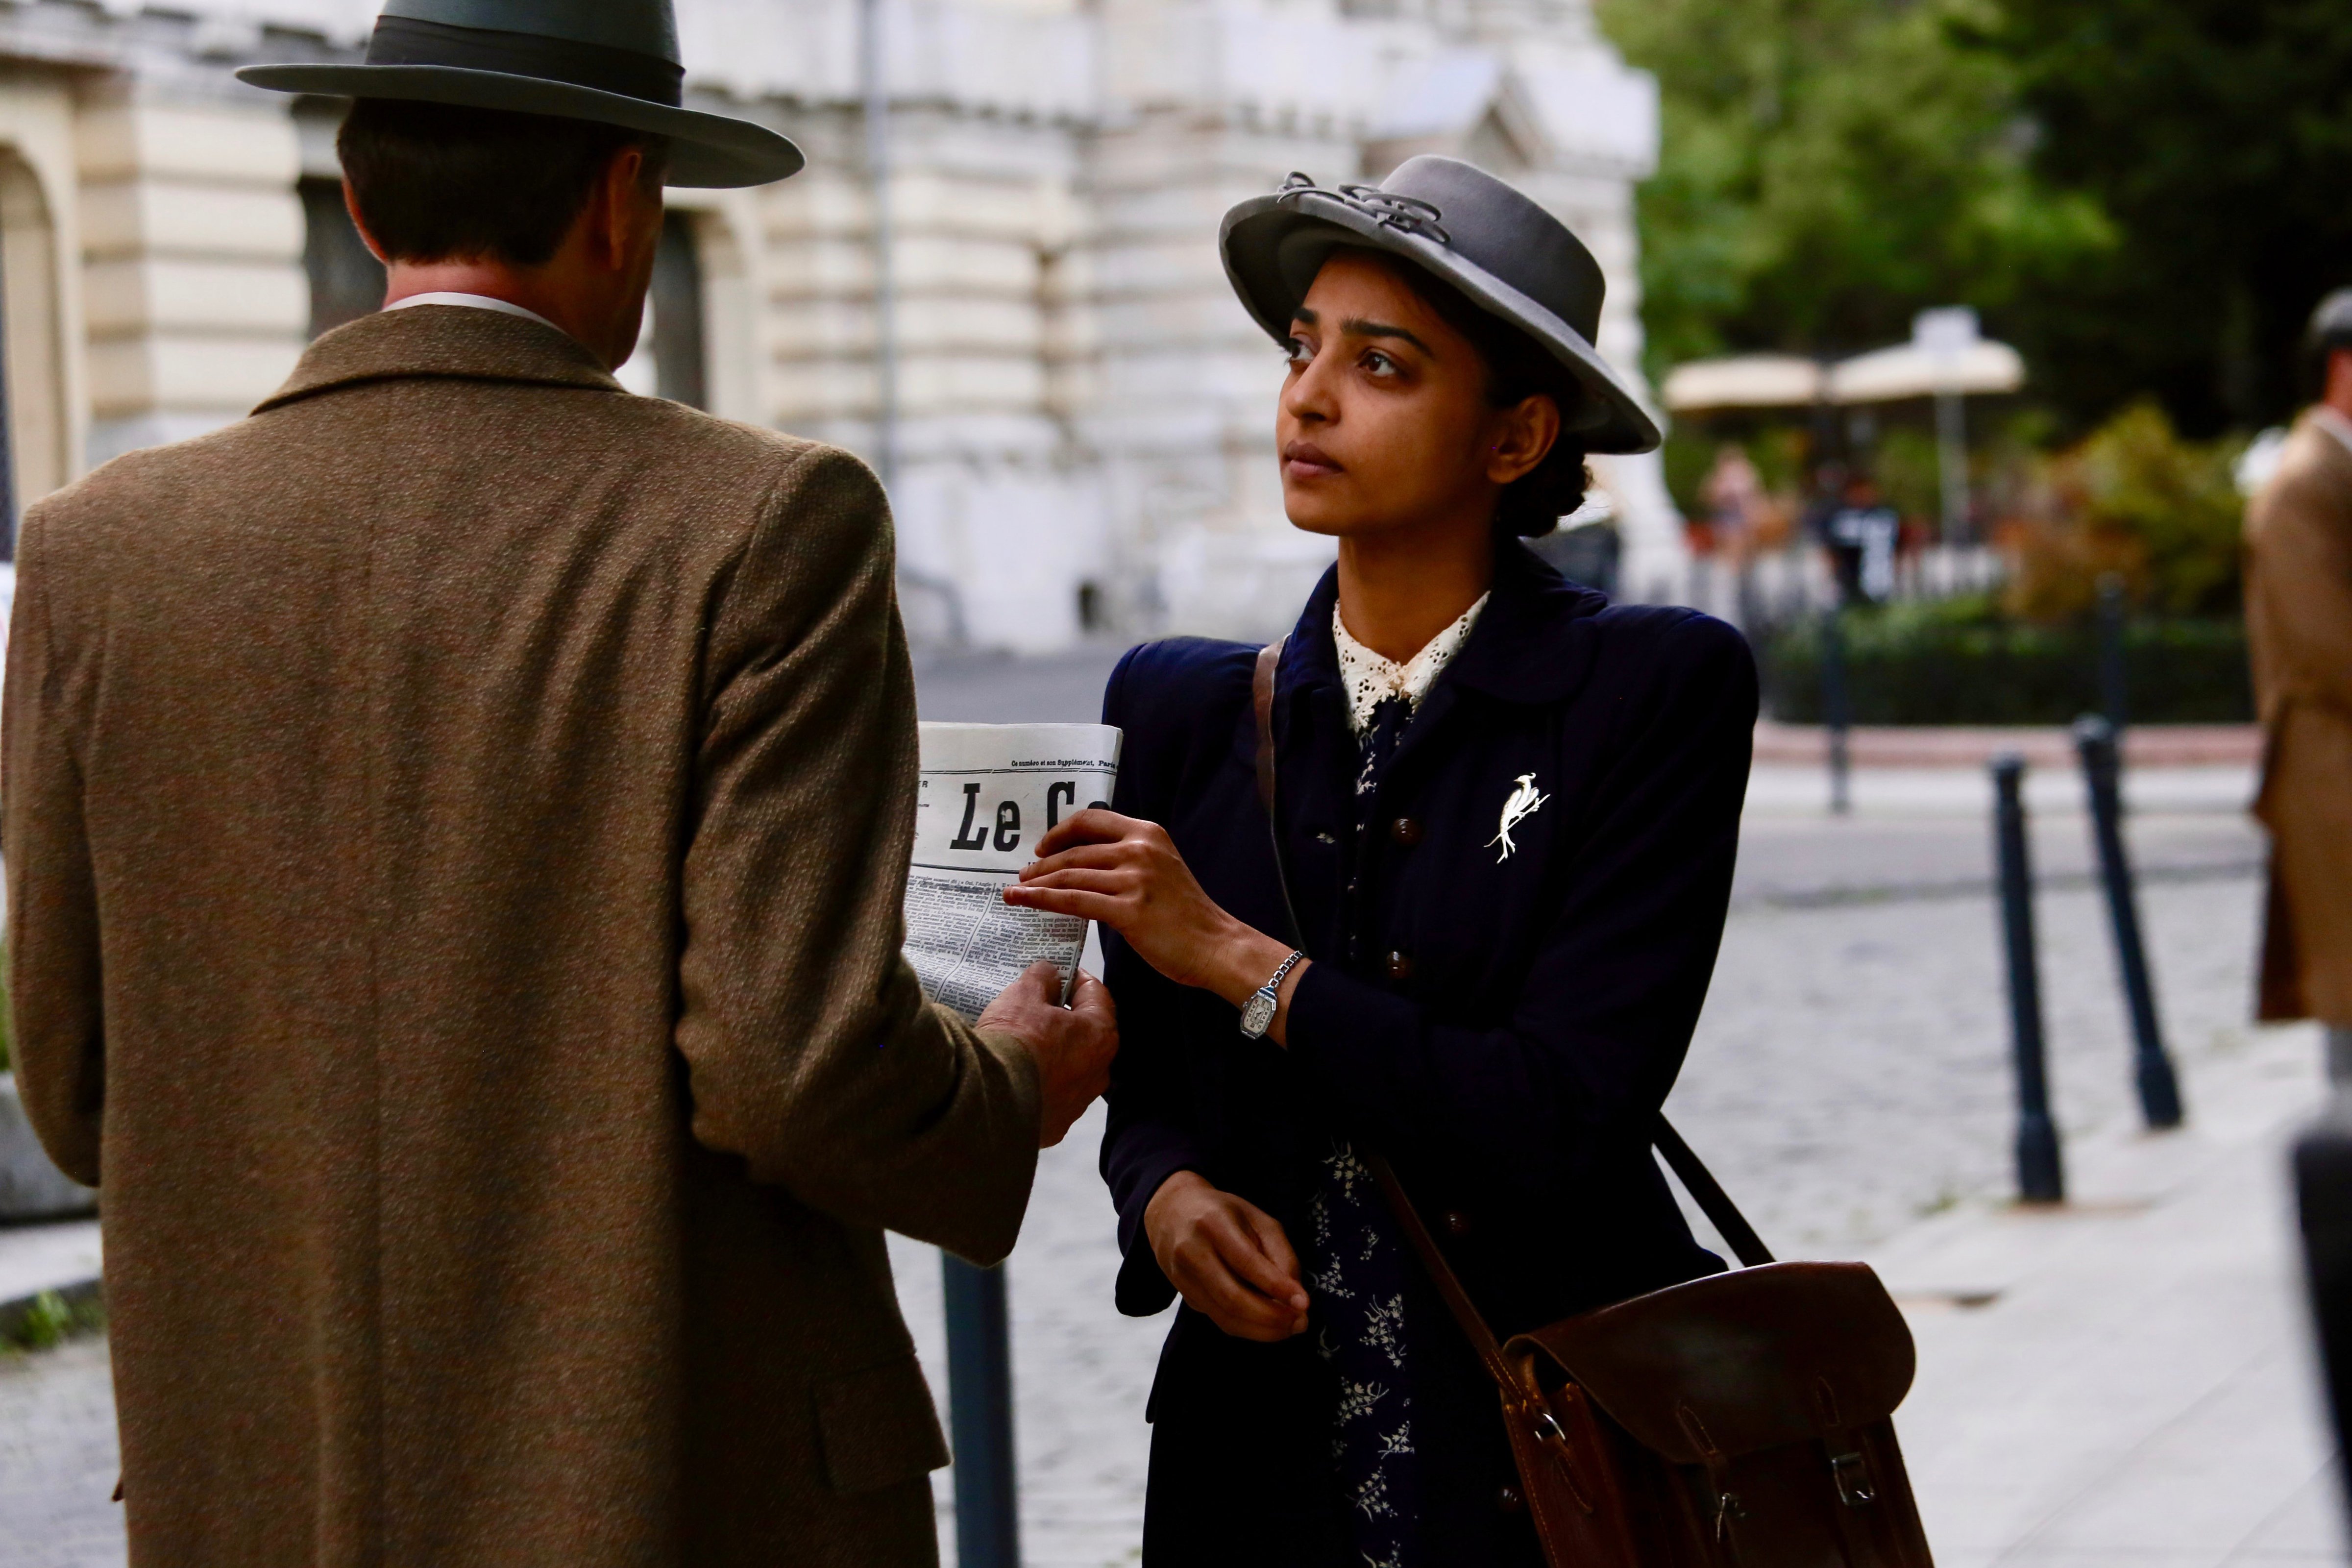 Radhika Apte as Noor Inayat Khan in 'A Call to Spy' (Courtesy of IFC Films)